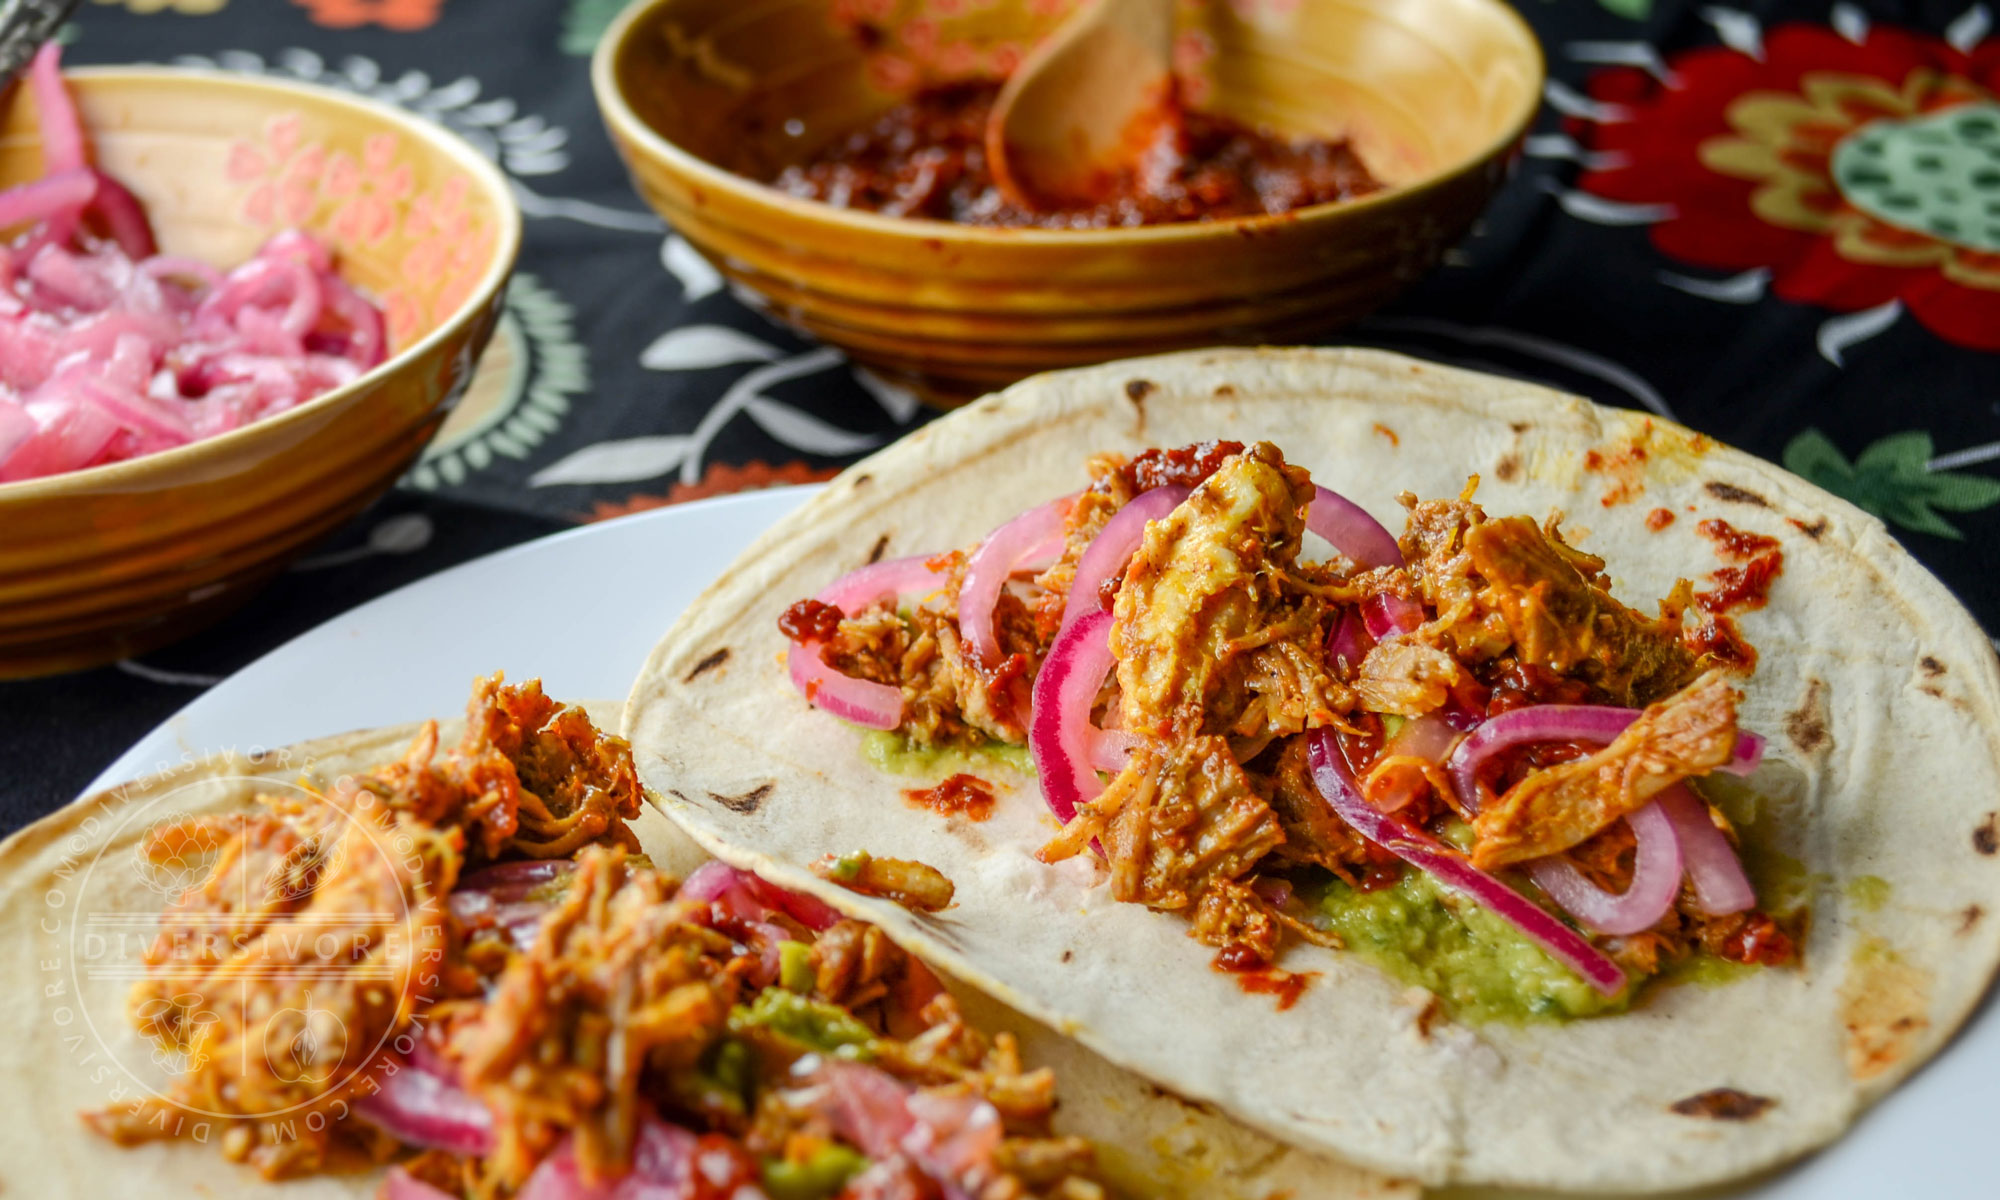 Featured image for “Pressure Cooker Puerco Pibil”